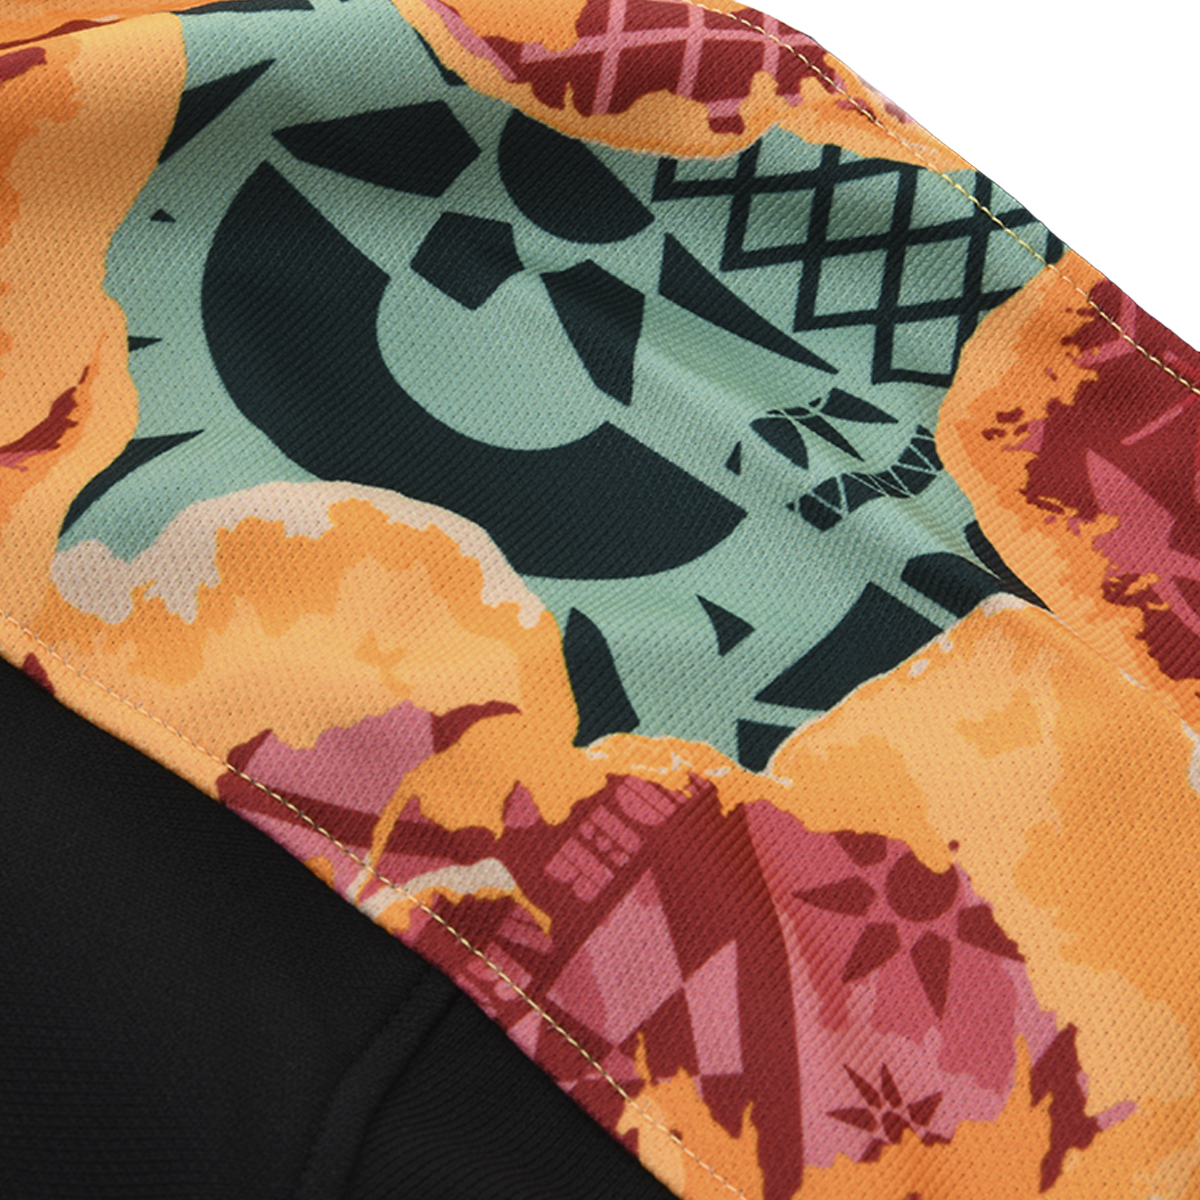 Campera Fútbol Under Armour Day Of The Dead Hombre,  image number null